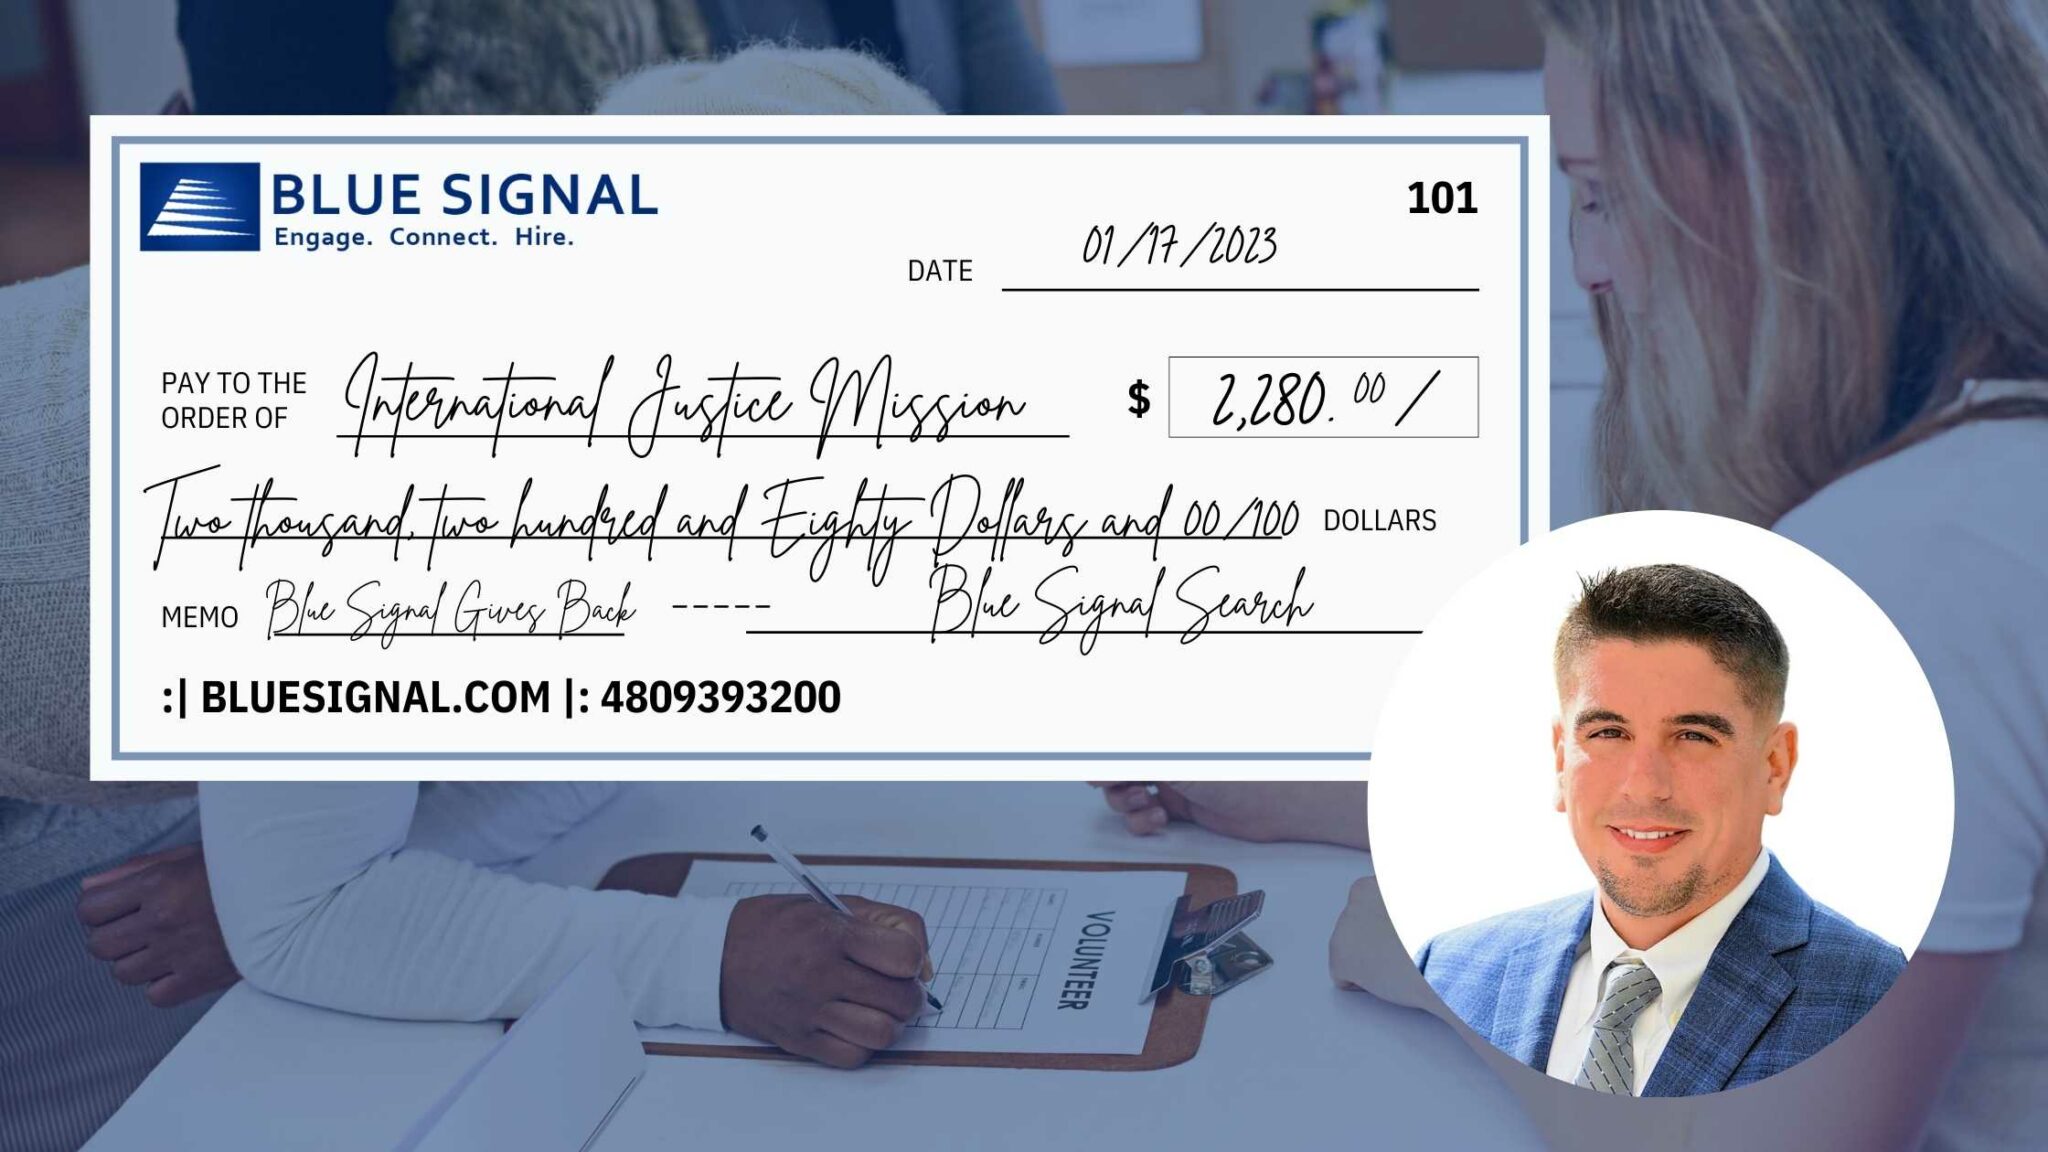 Blue Signal Gives Back donation to International Justice Mission